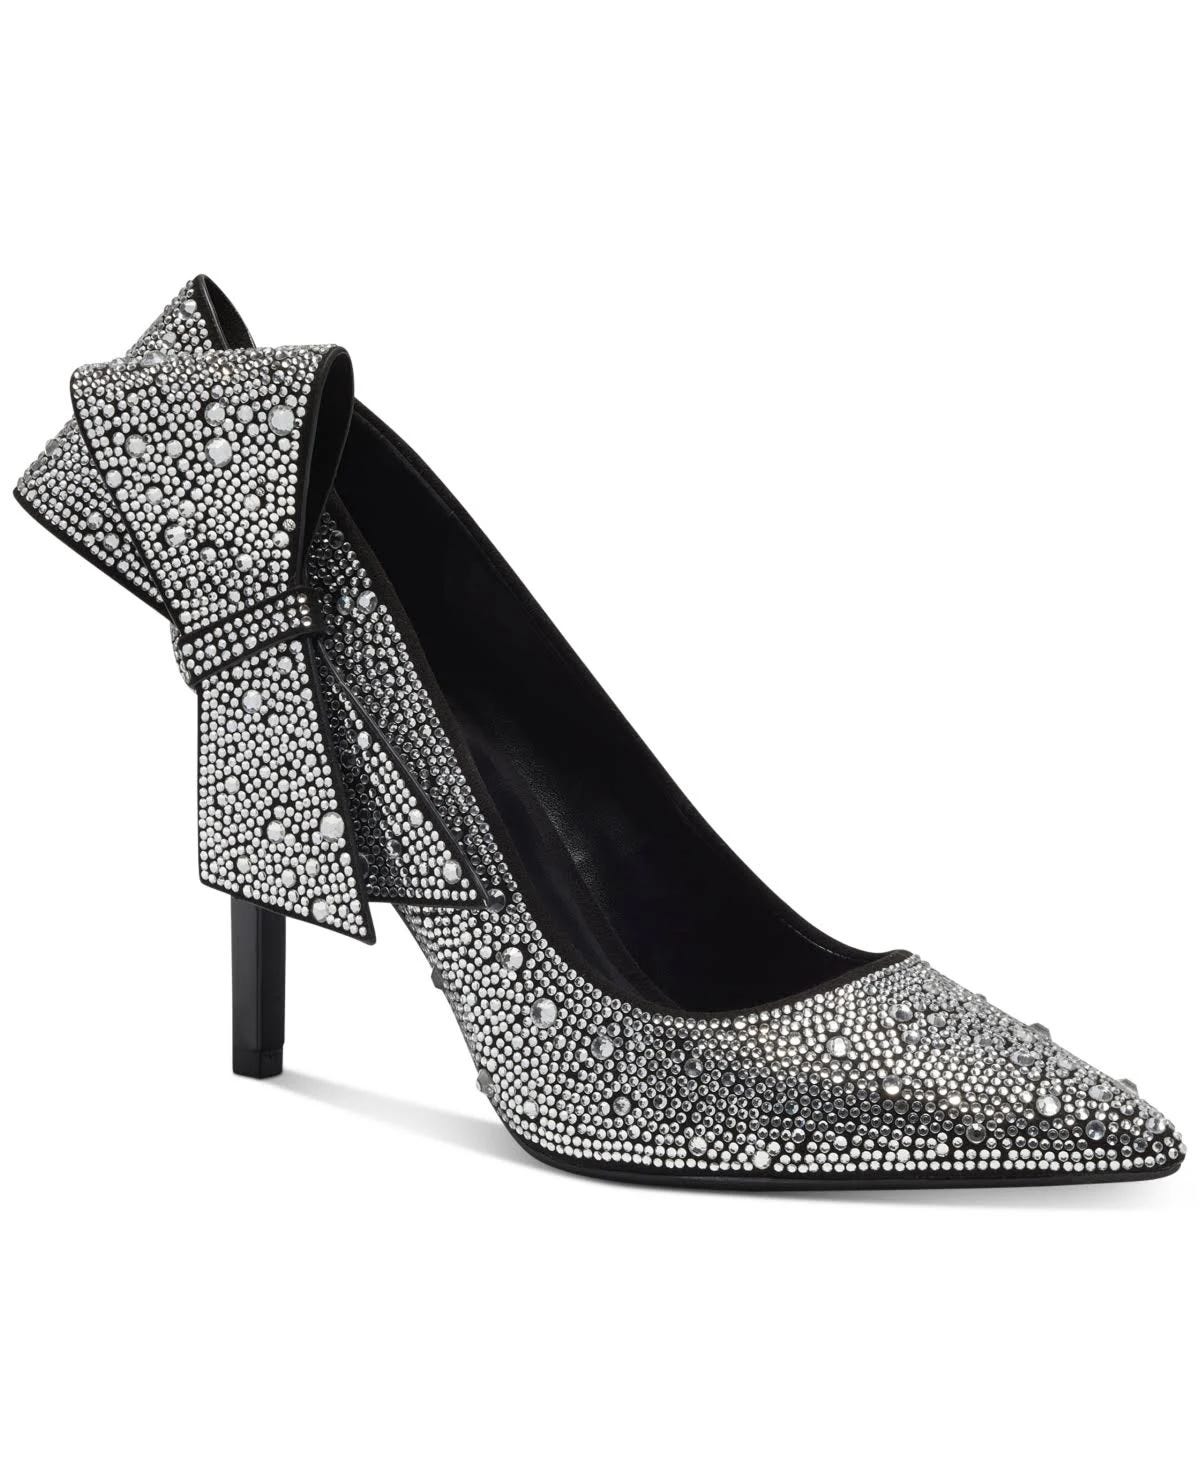 High Heel Black Bling Rhinestone Pumps with a Pretty Bow | Image